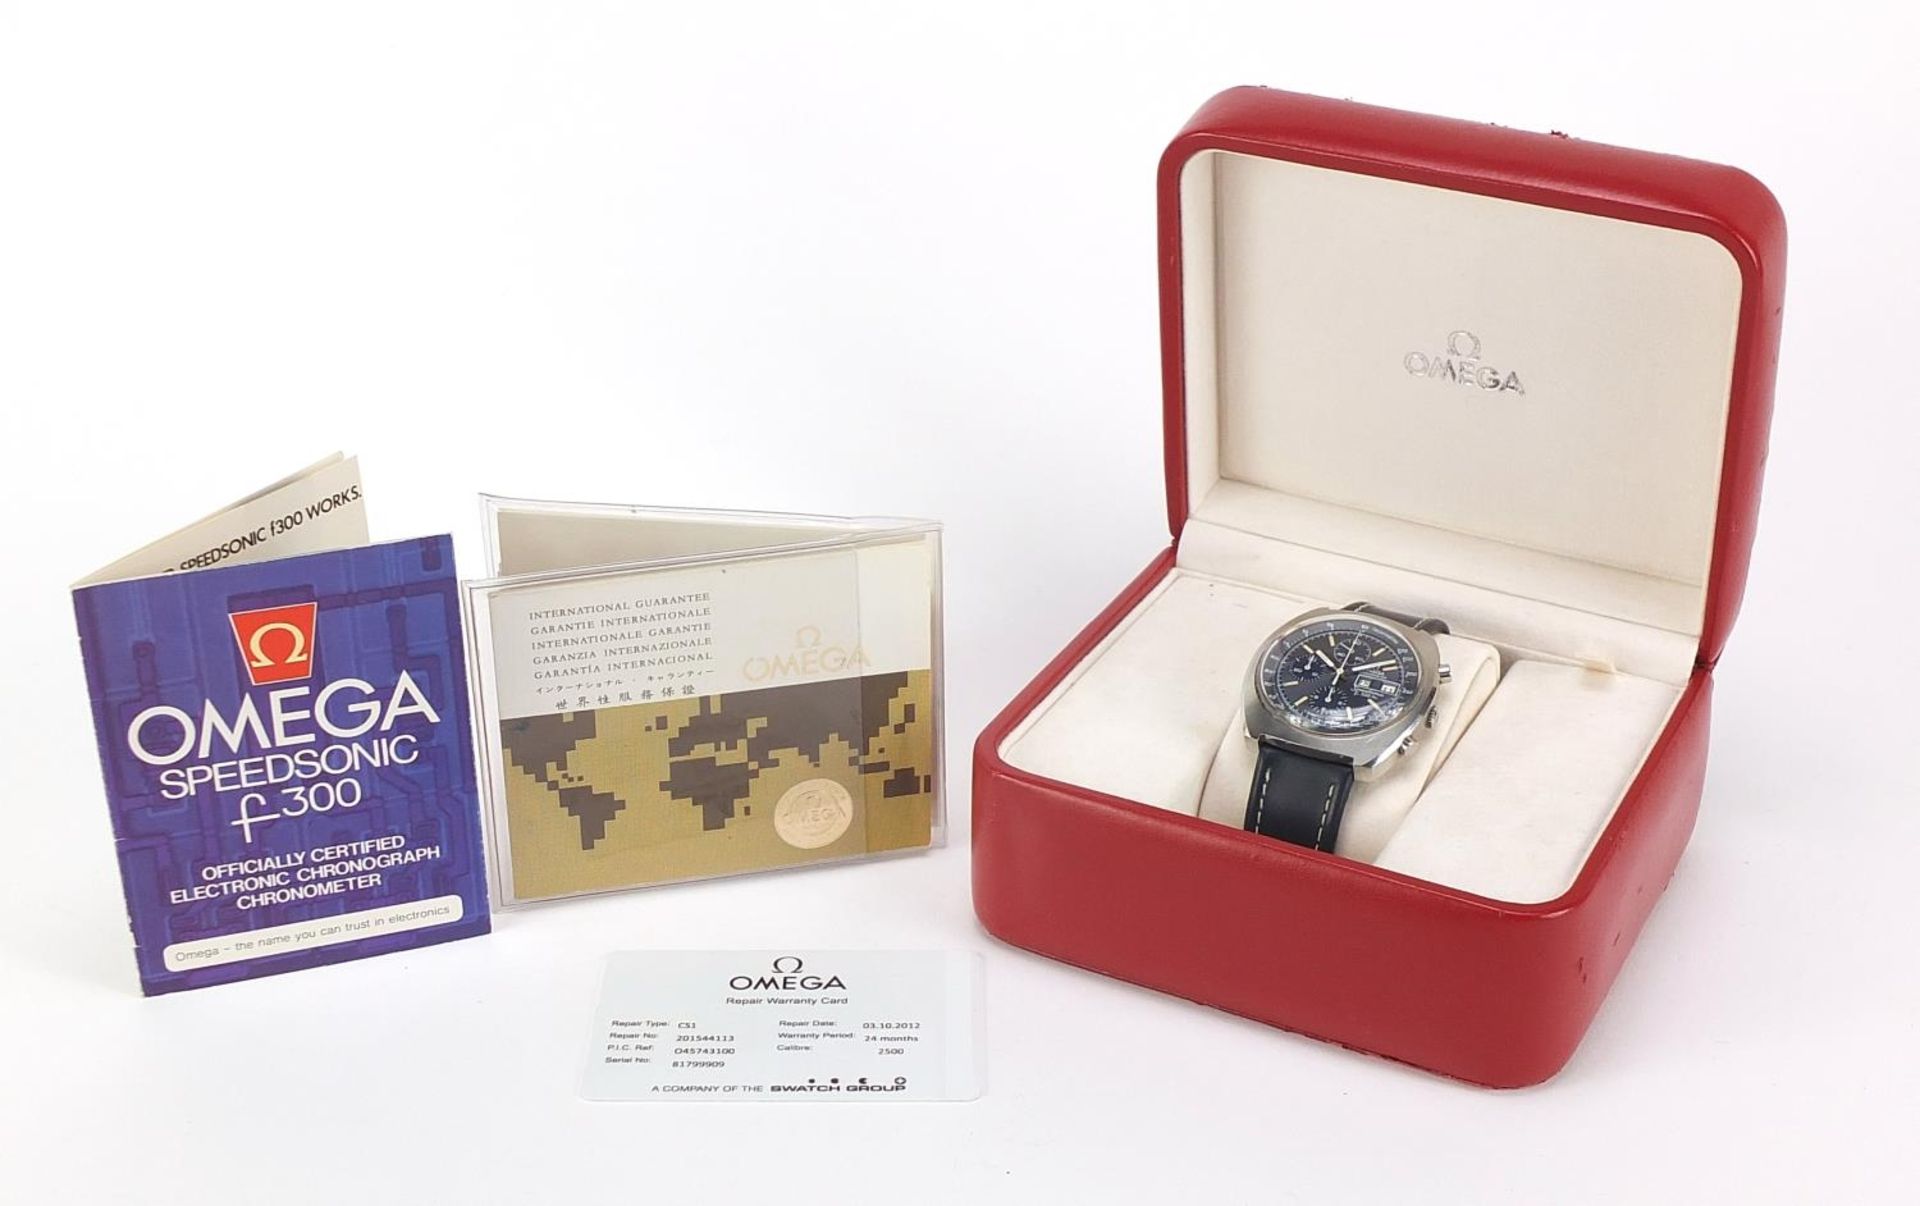 Omega, gentlemen's Speedsonic F300 electronic chronometer wristwatch with day/date aperture, box and - Image 5 of 7